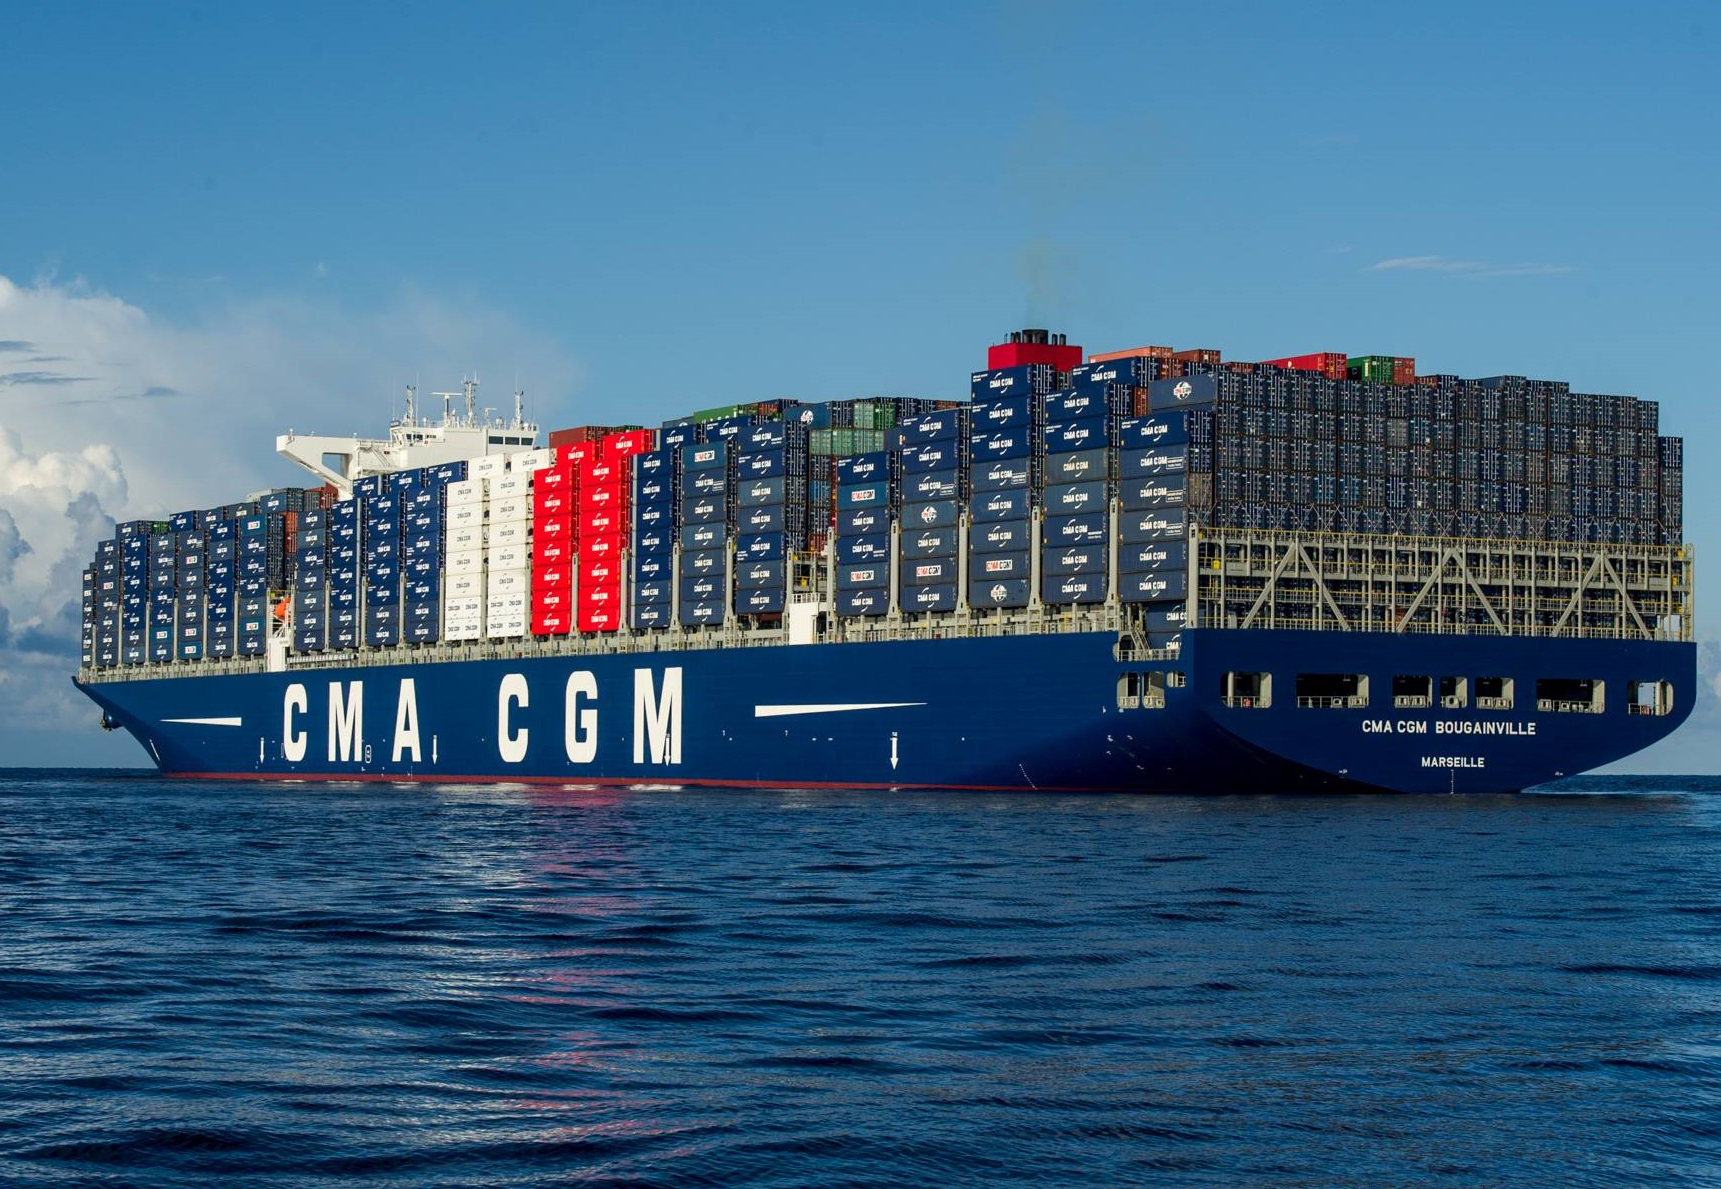 cma-cgm-to-take-25-stake-in-ceva-logistics-lineage-shipping